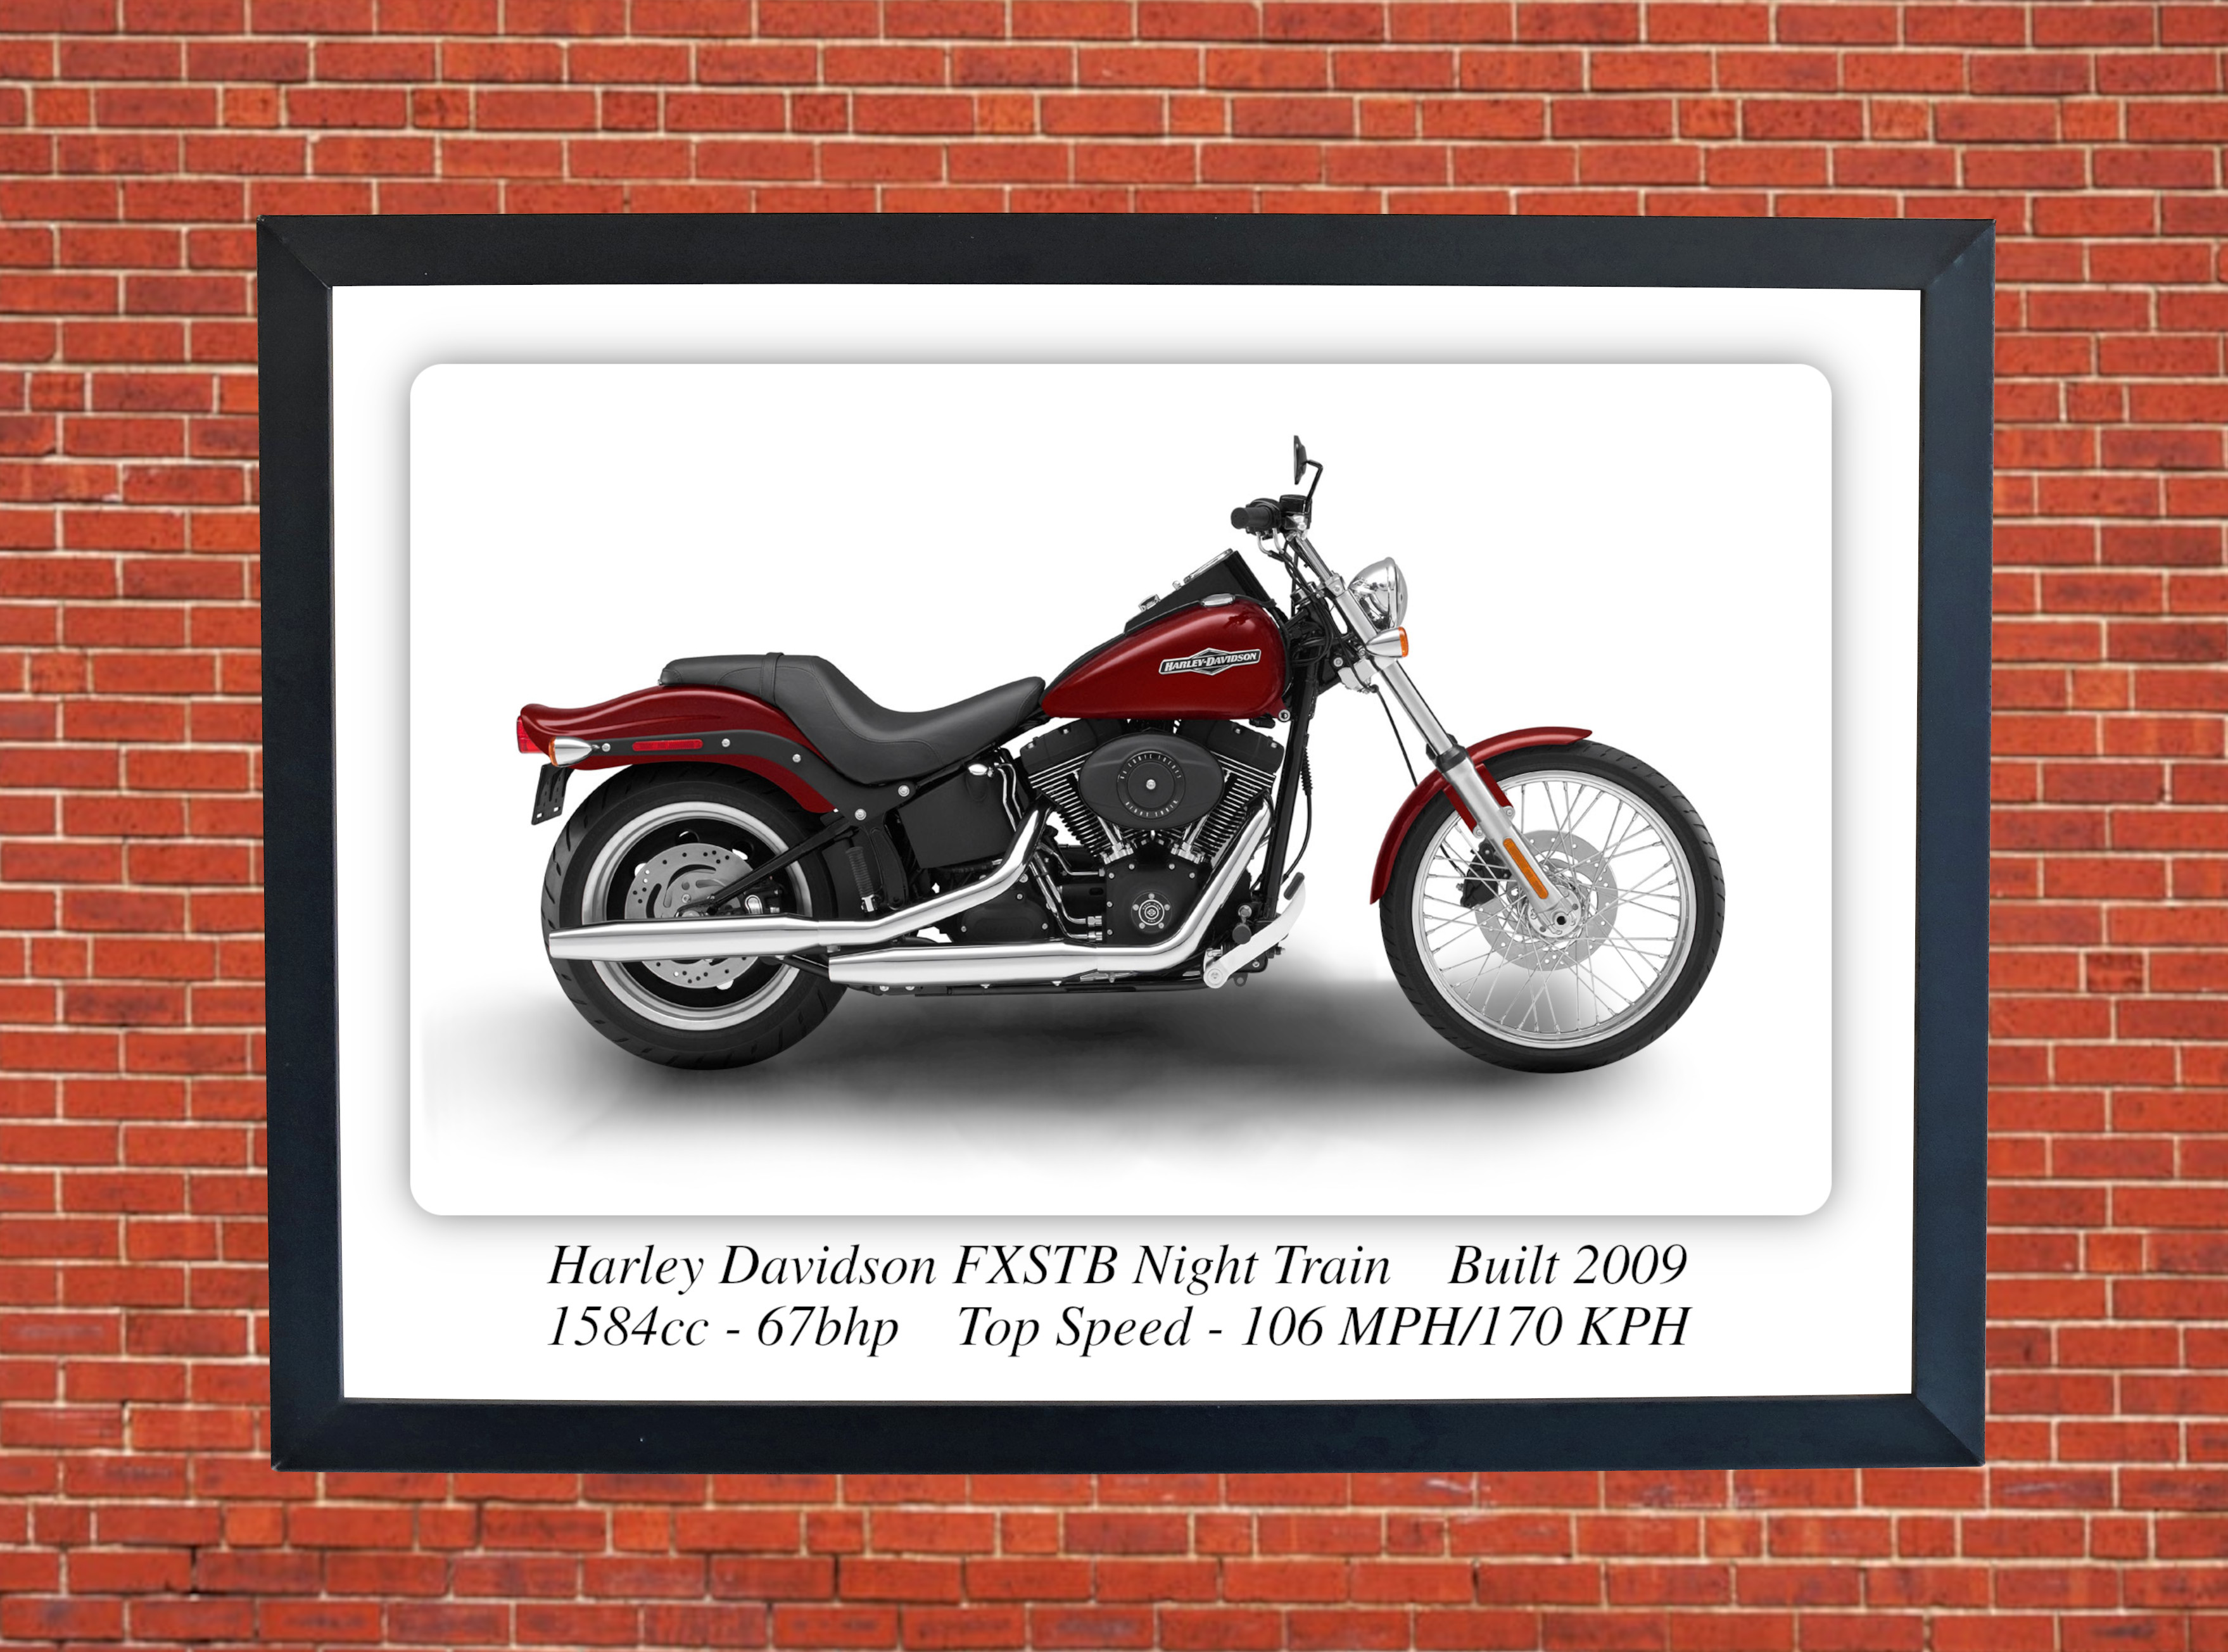 Harley Davidson FXSTB Night Train Motorcycle - A3/A4 Print Poster